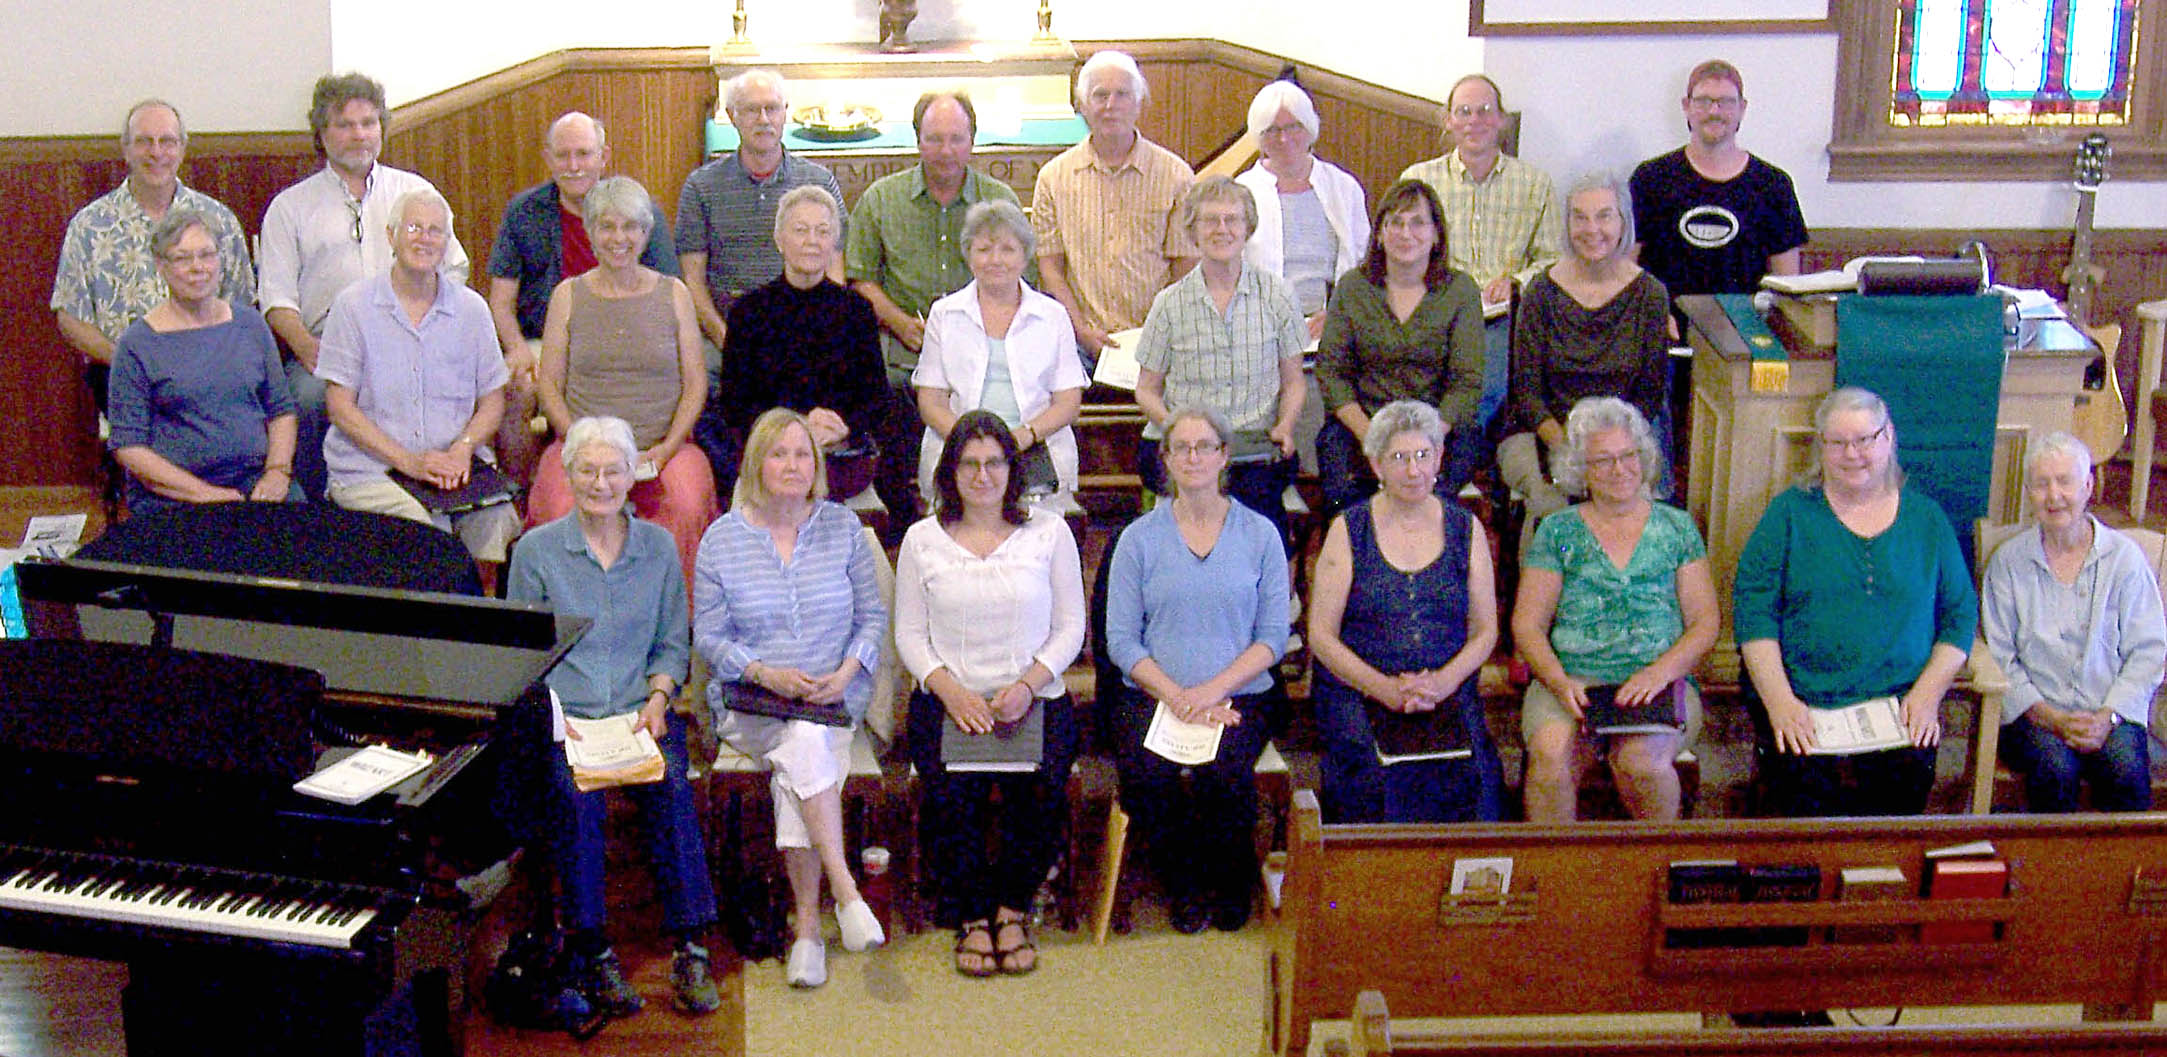 The Summertime Singers at 7 p.m. Thursday will be the featured guests of the ongoing Candlelight Concert Series at Trinity United Methodist Church